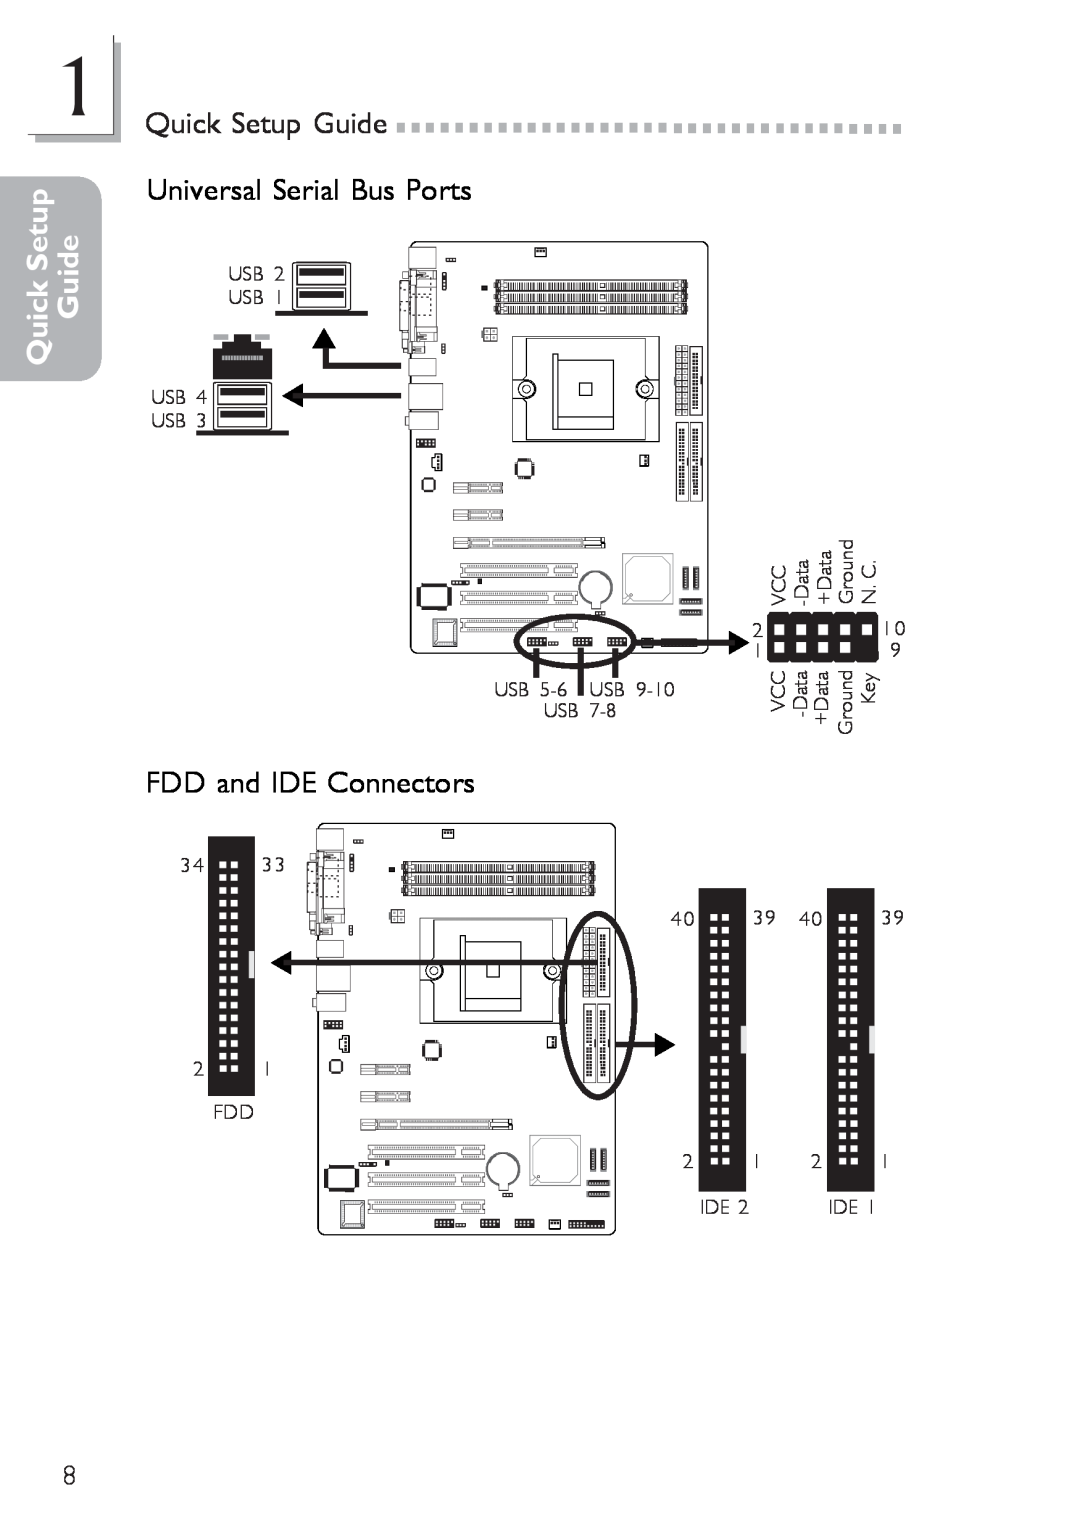 Infinity nF4X user manual Universal Serial Bus Ports, FDD and IDE Connectors, Quick Setup Guide 